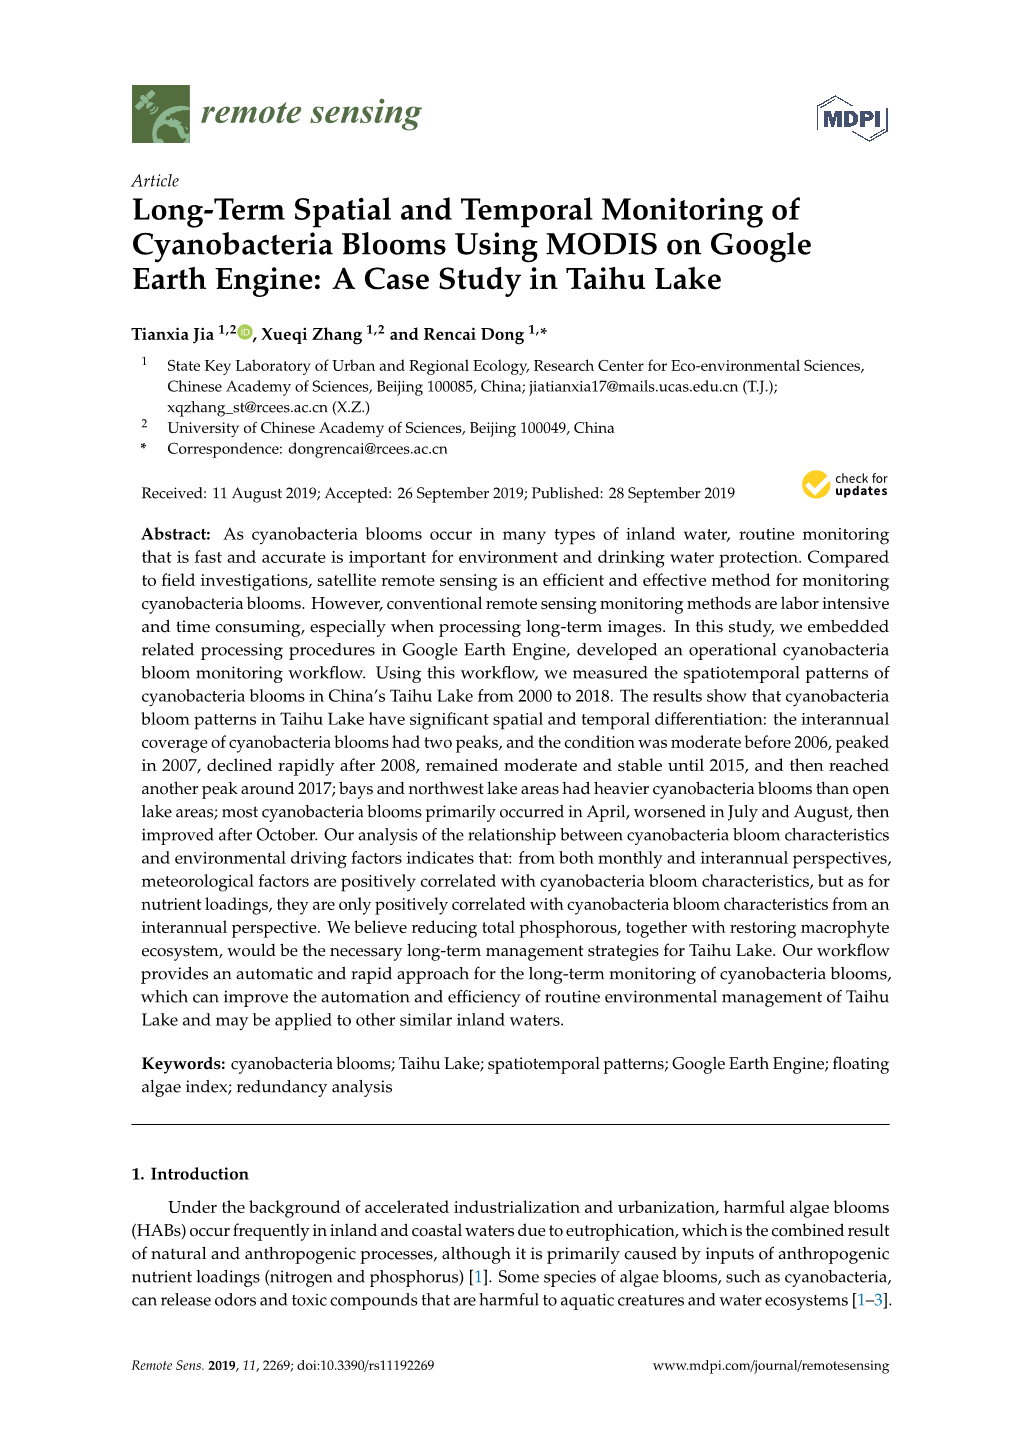 Long-Term Spatial and Temporal Monitoring of Cyanobacteria Blooms Using MODIS on Google Earth Engine: a Case Study in Taihu Lake